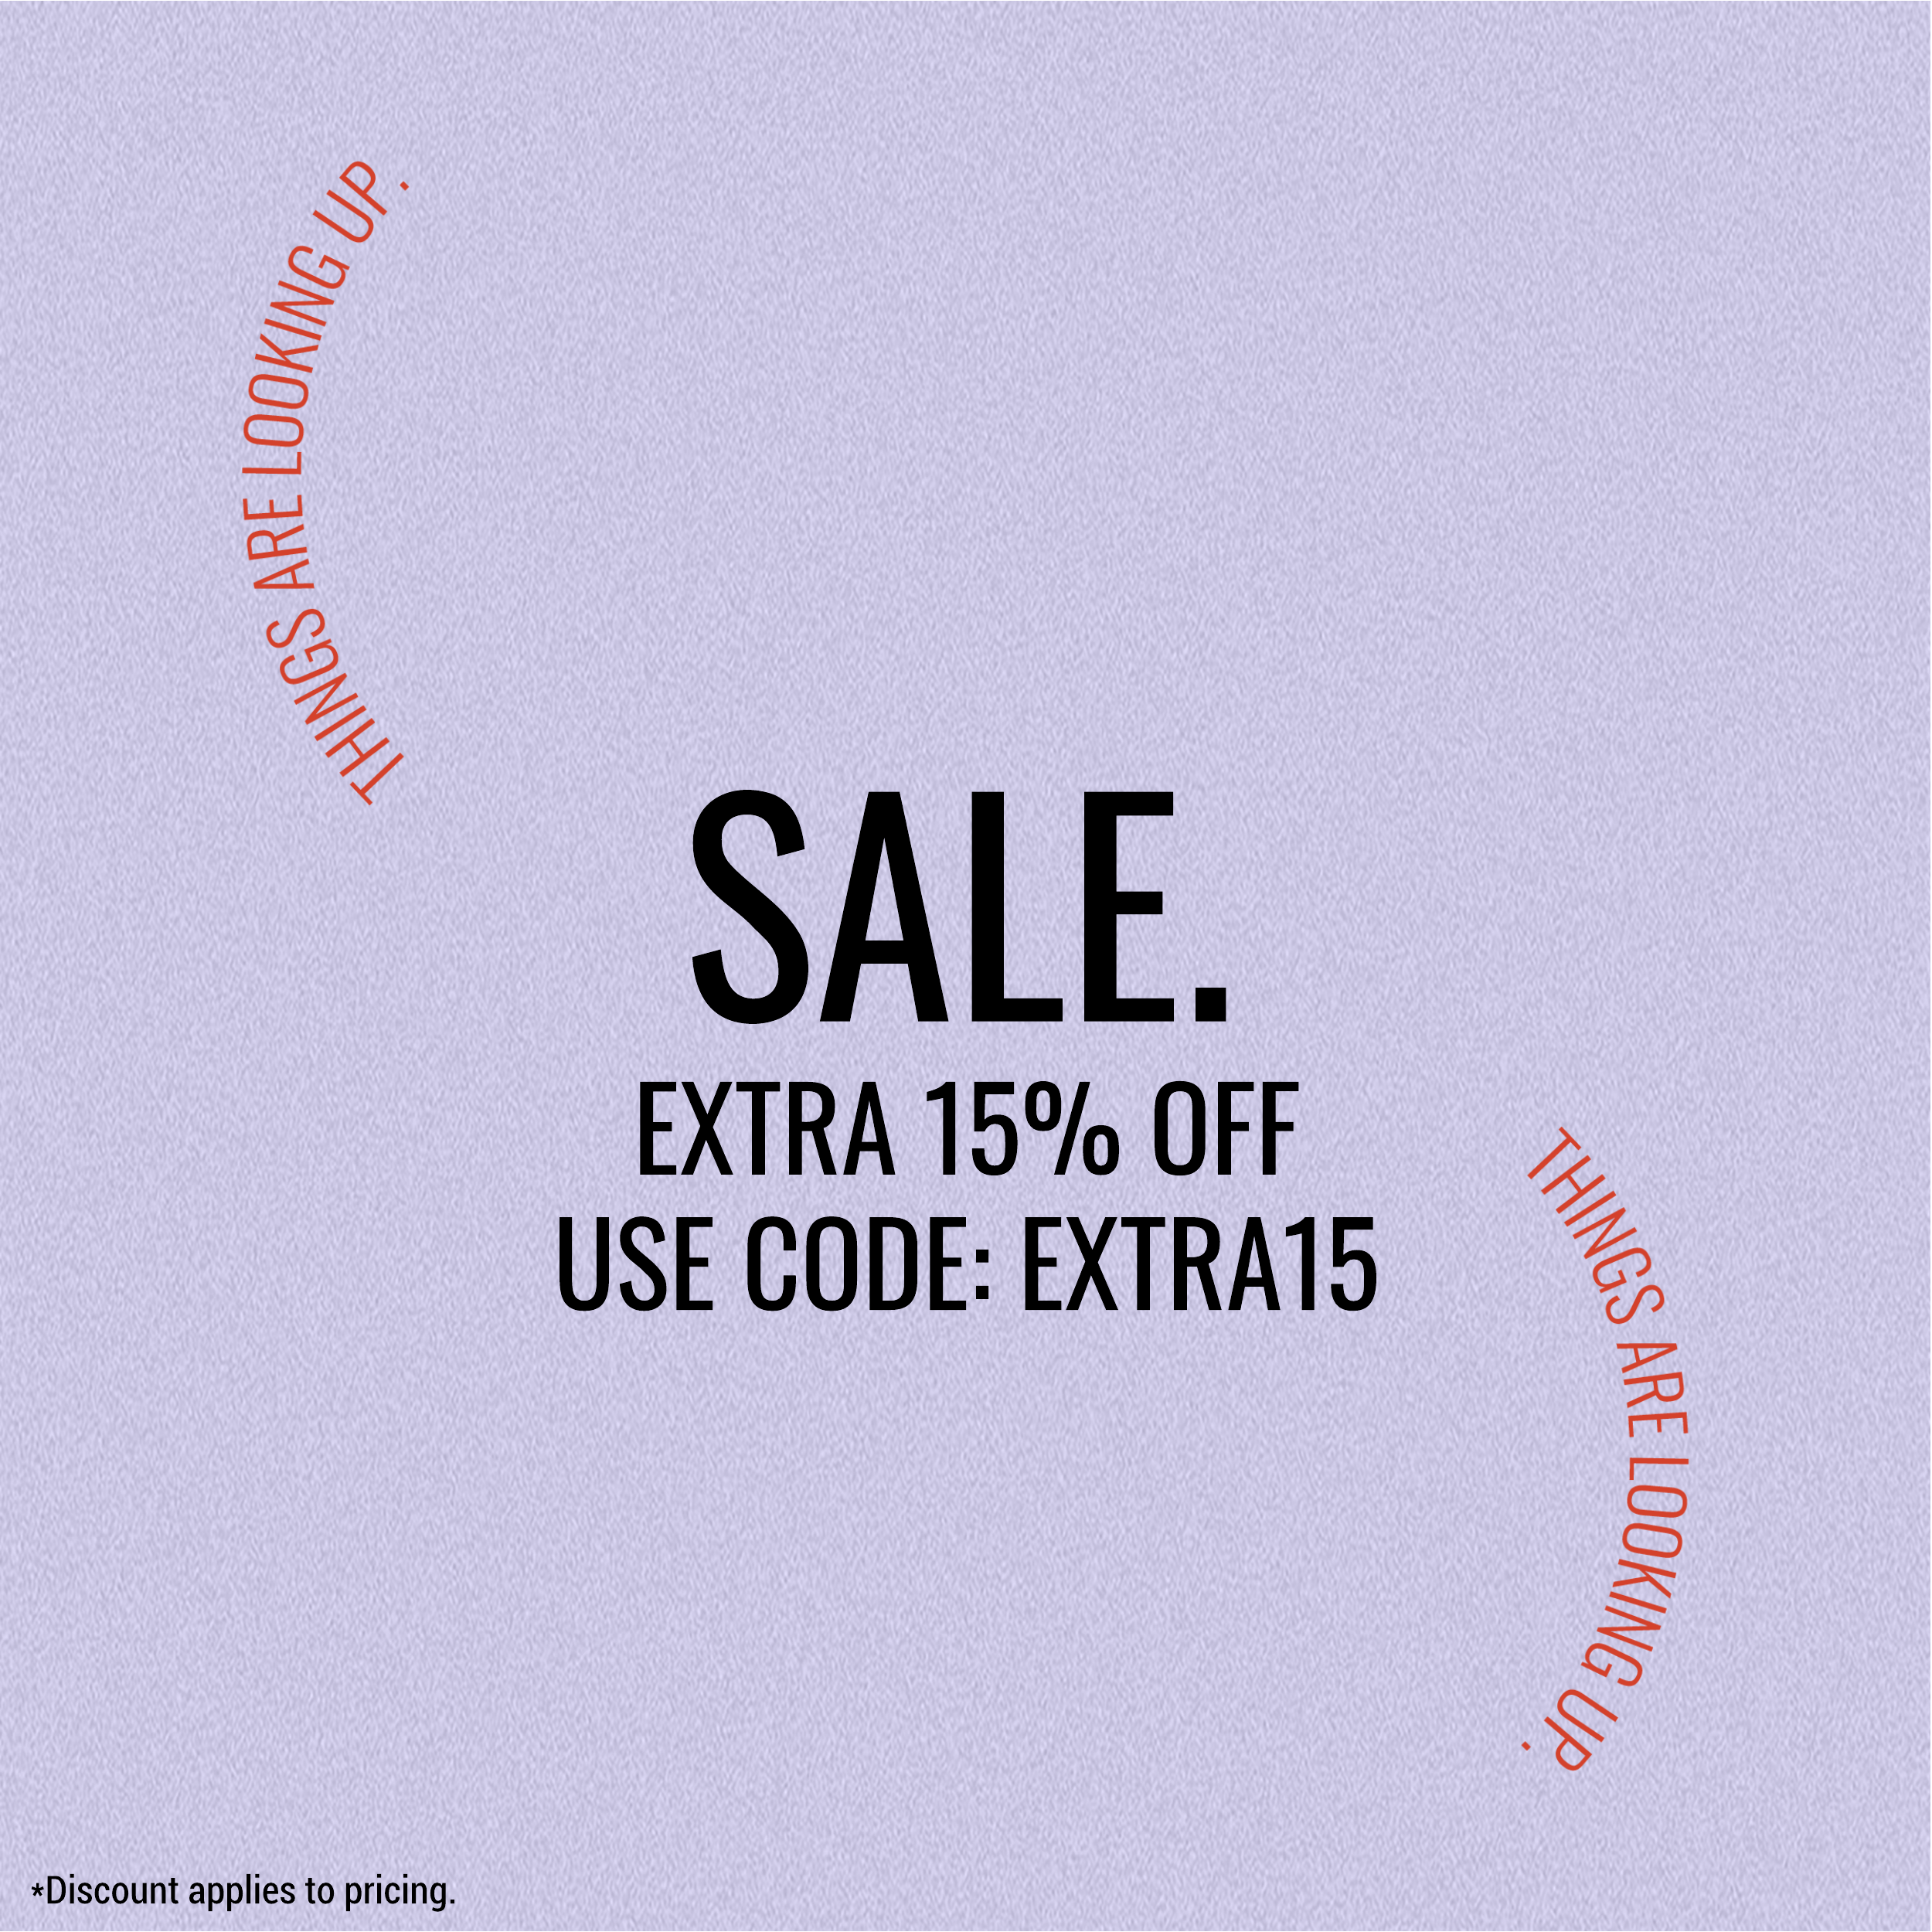 Extra 15% off SALE